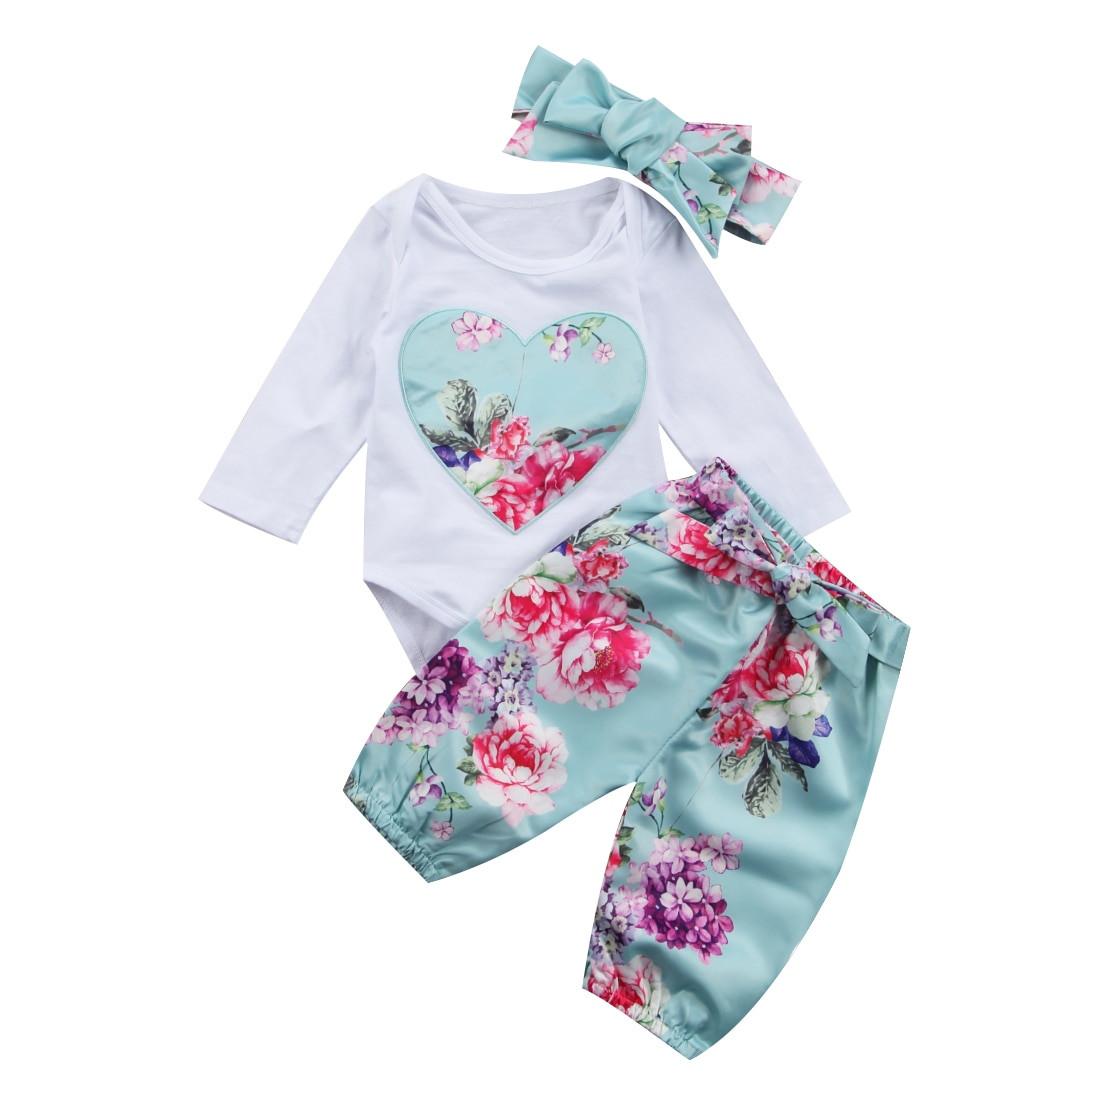 Baby Girl Fashion Outfits
 Aliexpress Buy Baby Girls Clothing Sets Autumn Love